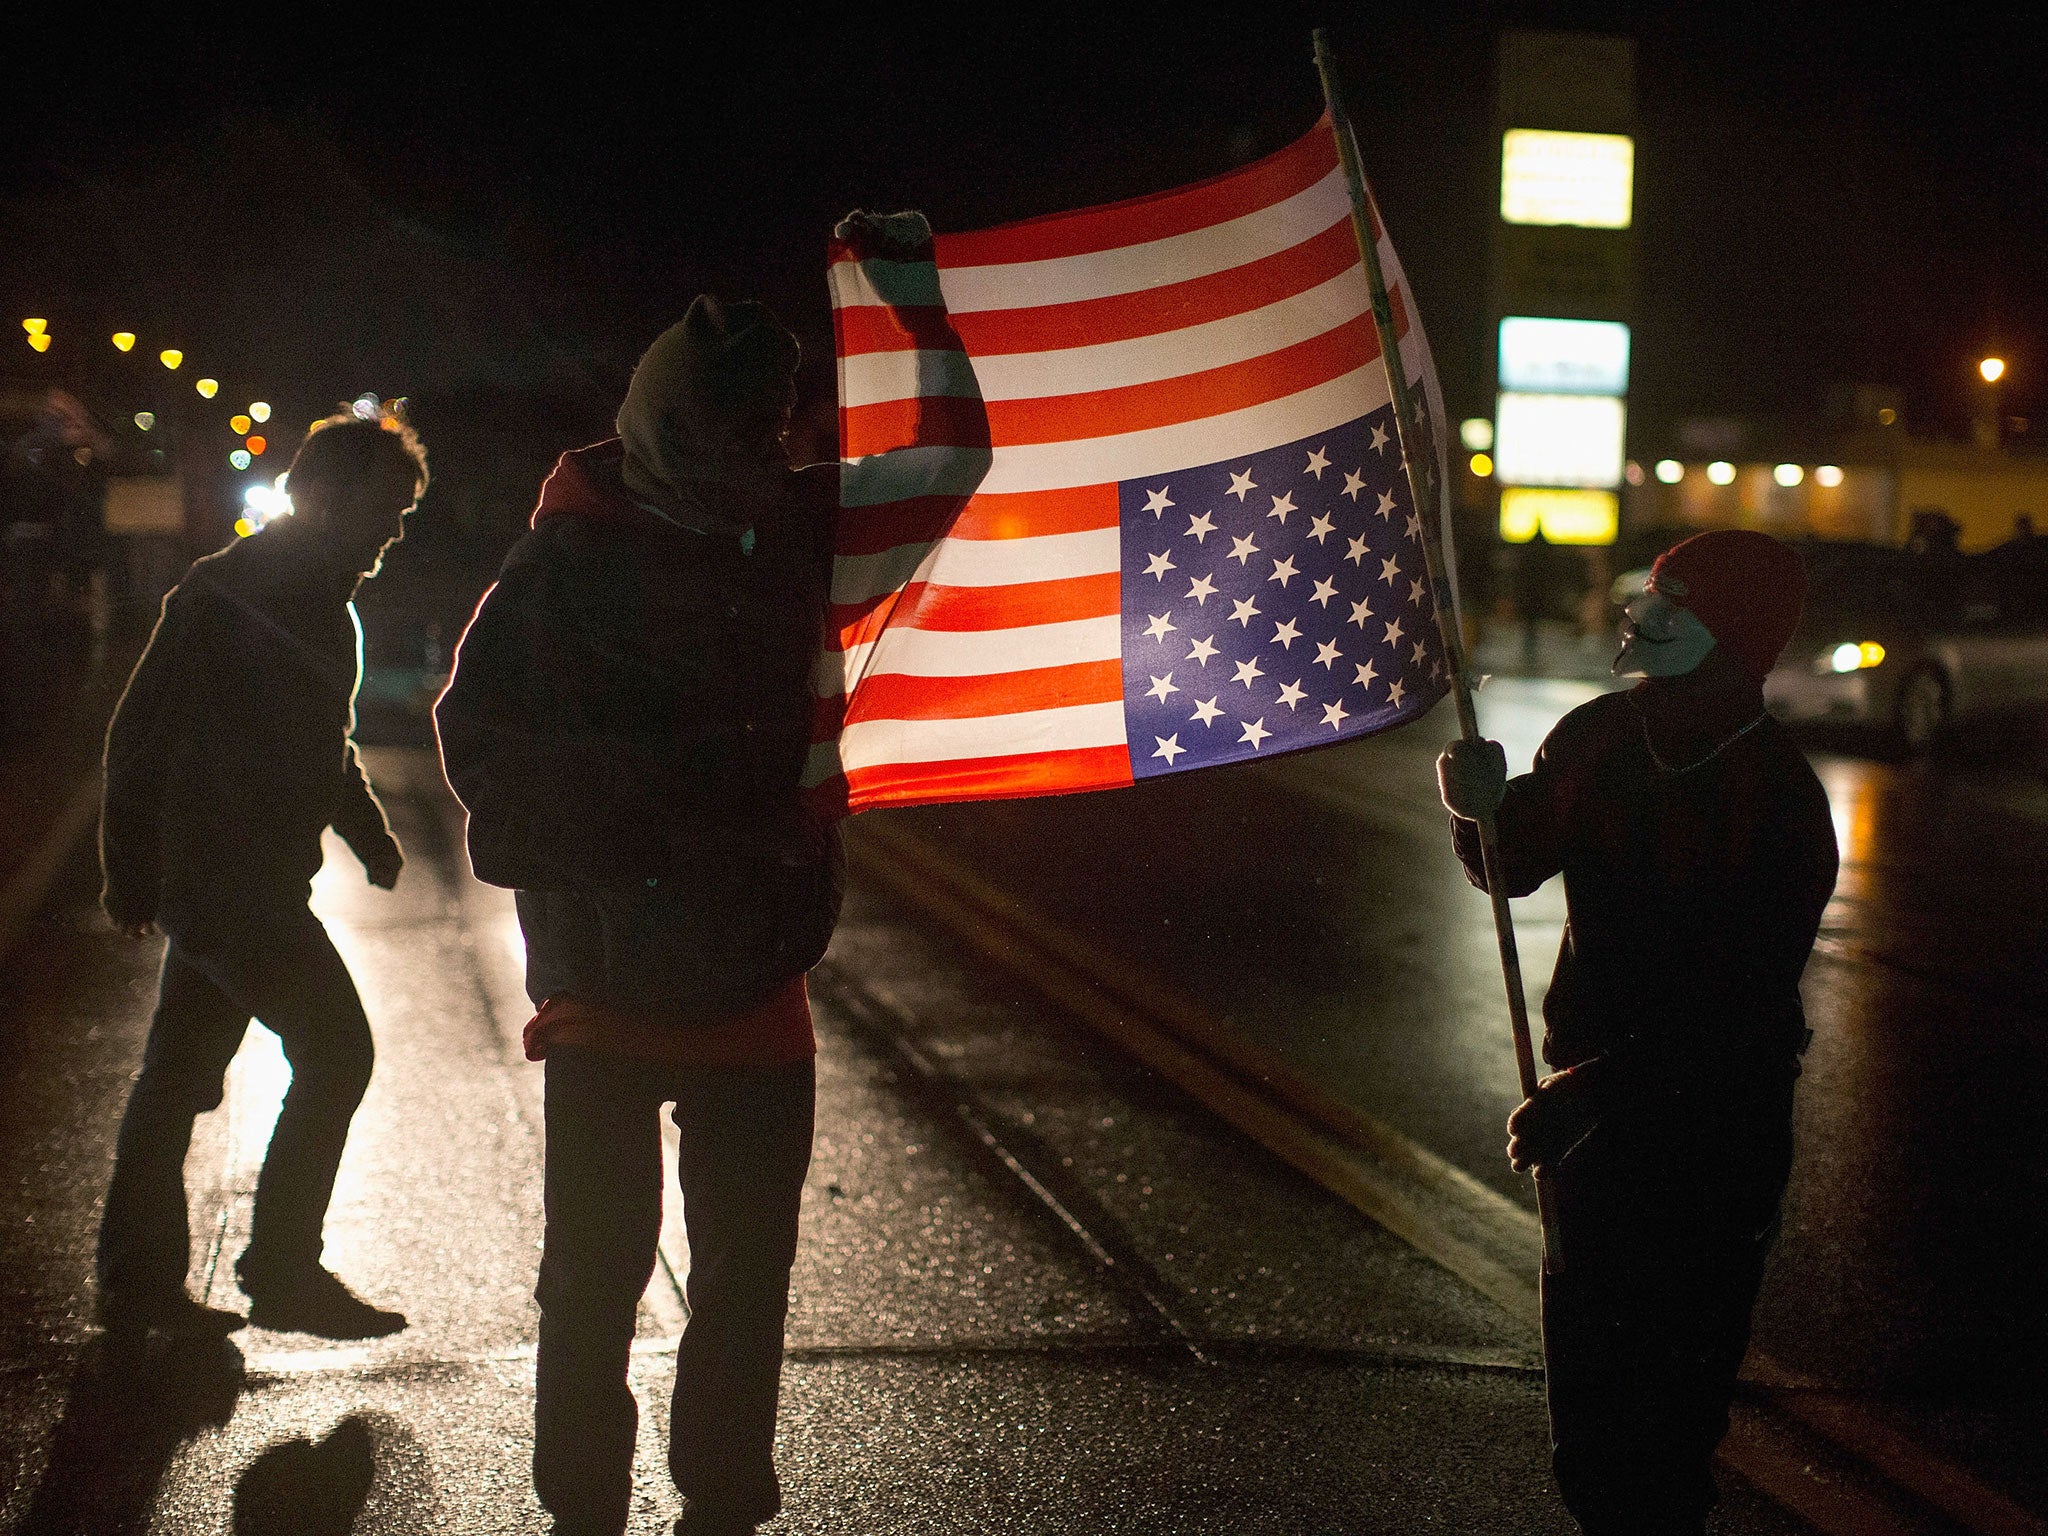 Demonstrators in Ferguson, Missouri, mount a protest ahead of the grand jury’s decision. Such protests have been ongoing in the city since 18-year-old Michael Brown’s killing